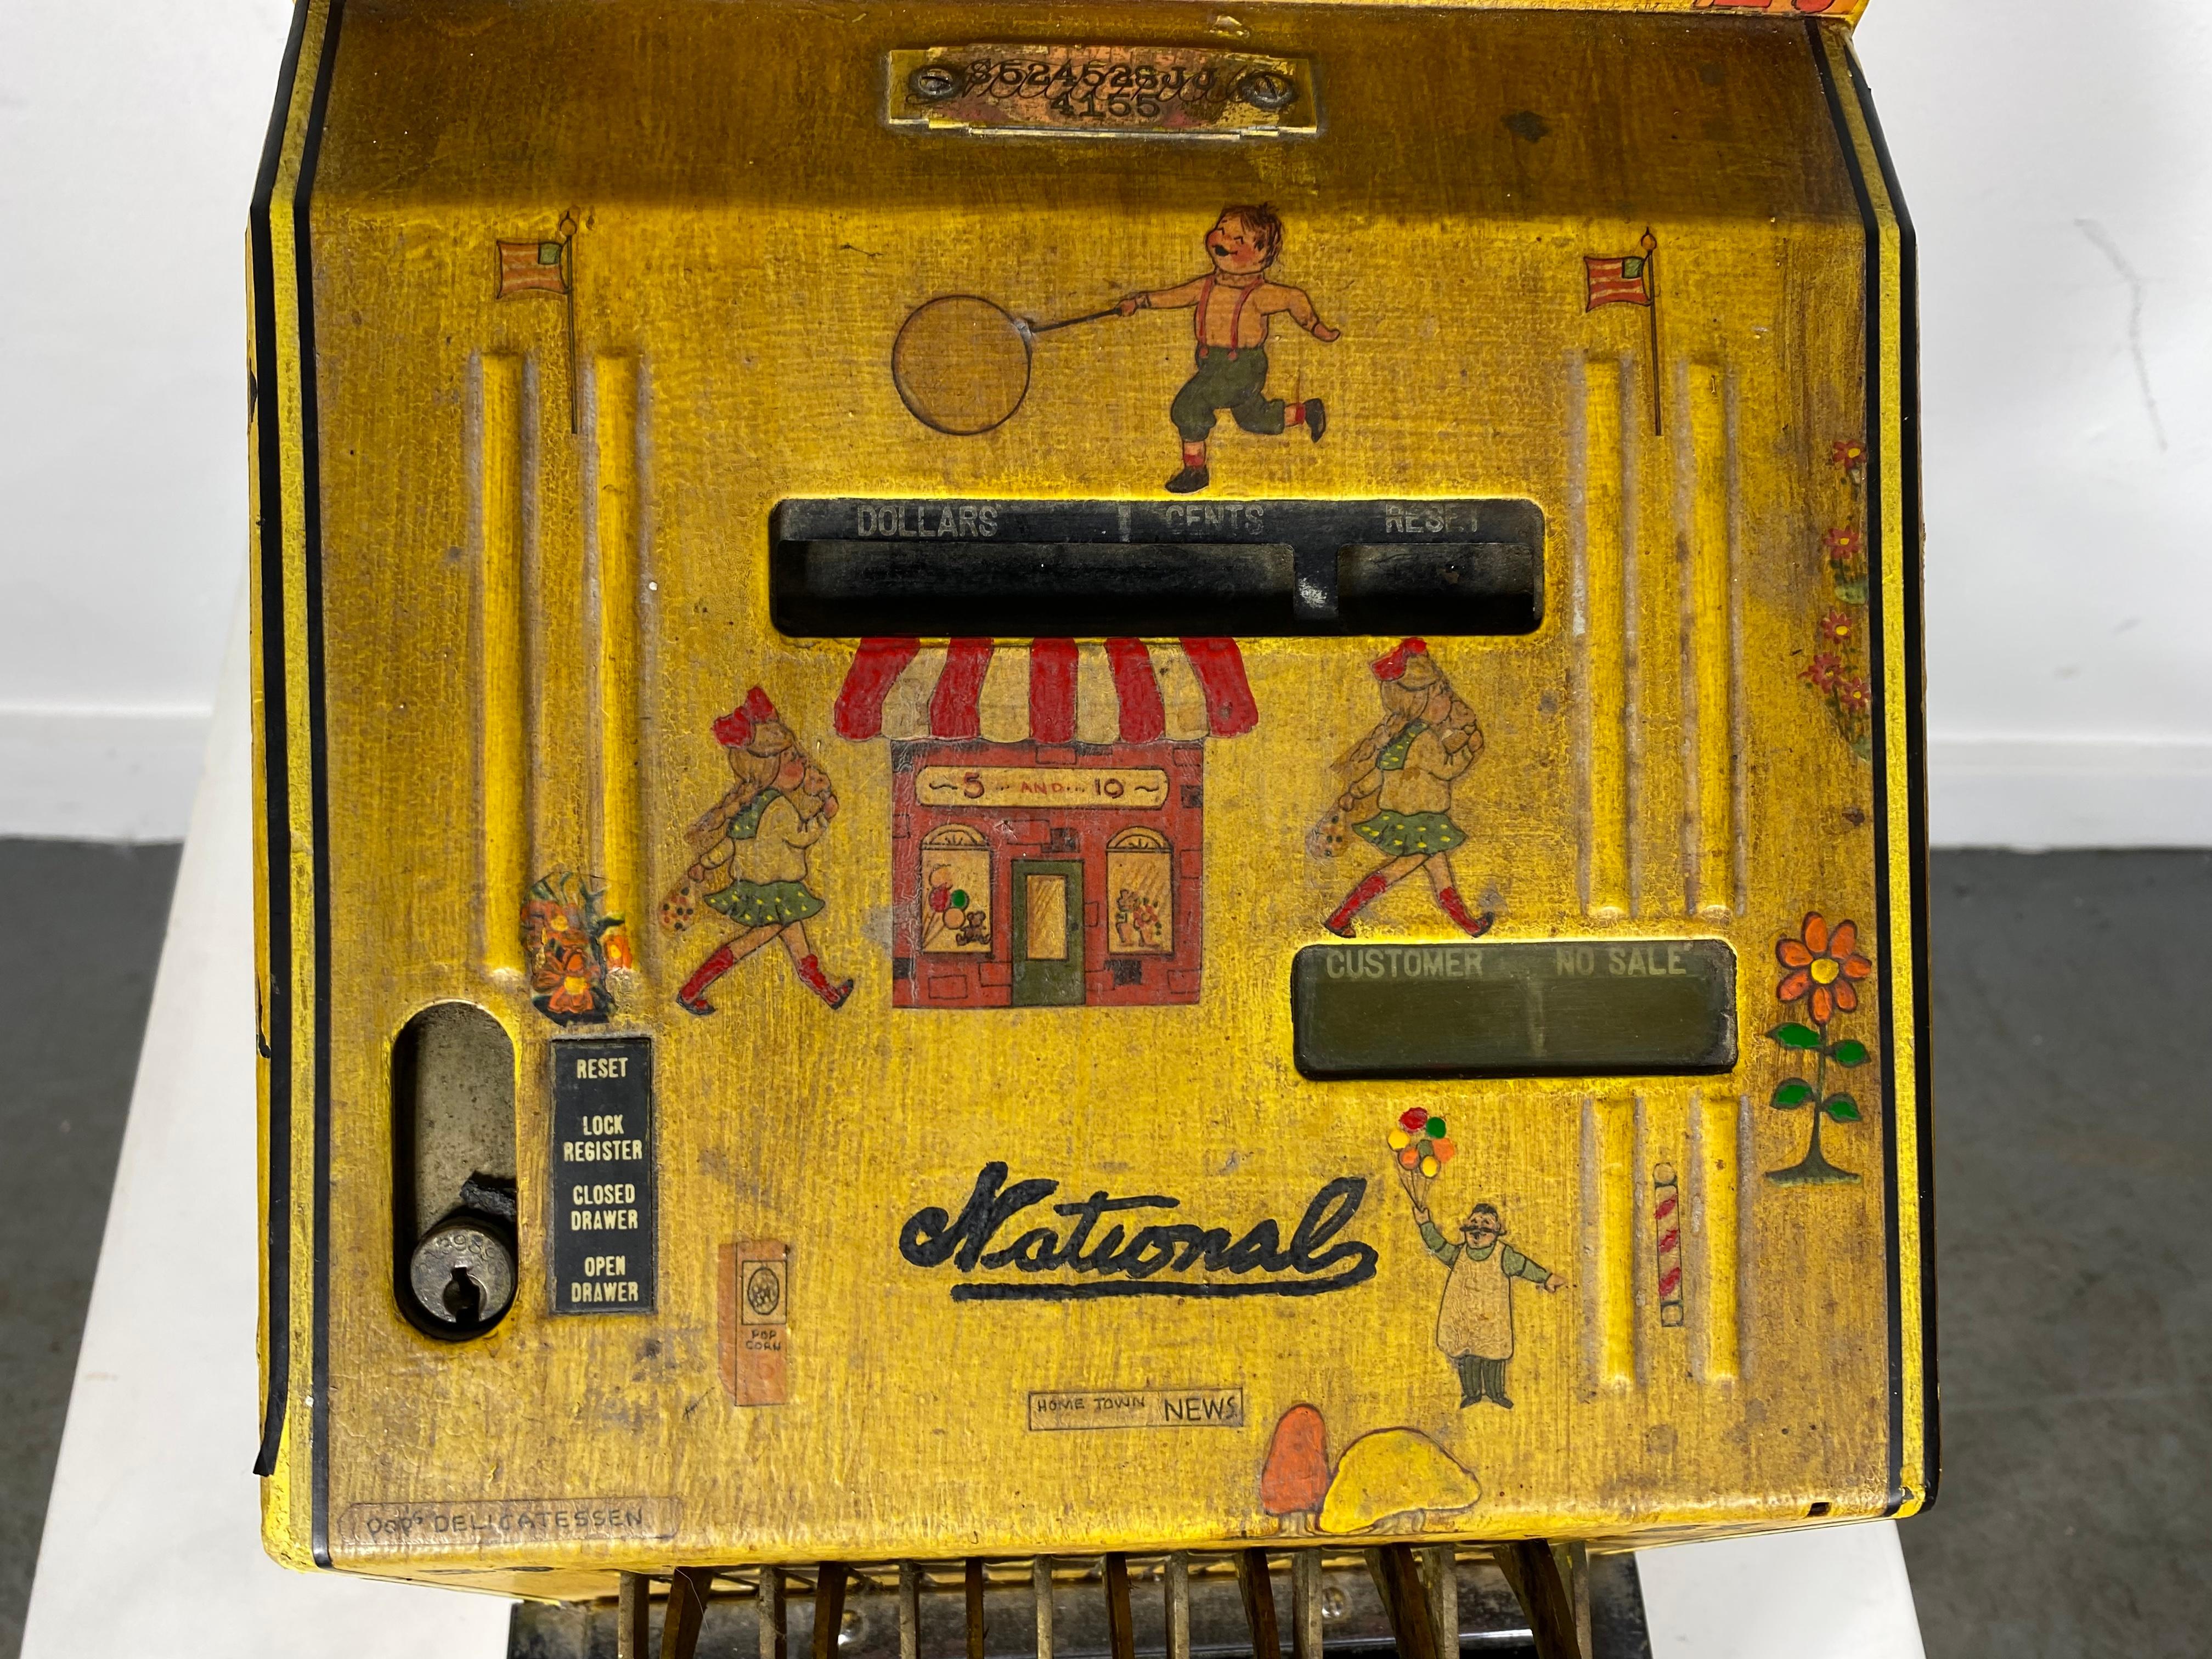  Art Deco / Folk aRT Candy Store, National Cash Register, stenciled and painted In Good Condition For Sale In Buffalo, NY